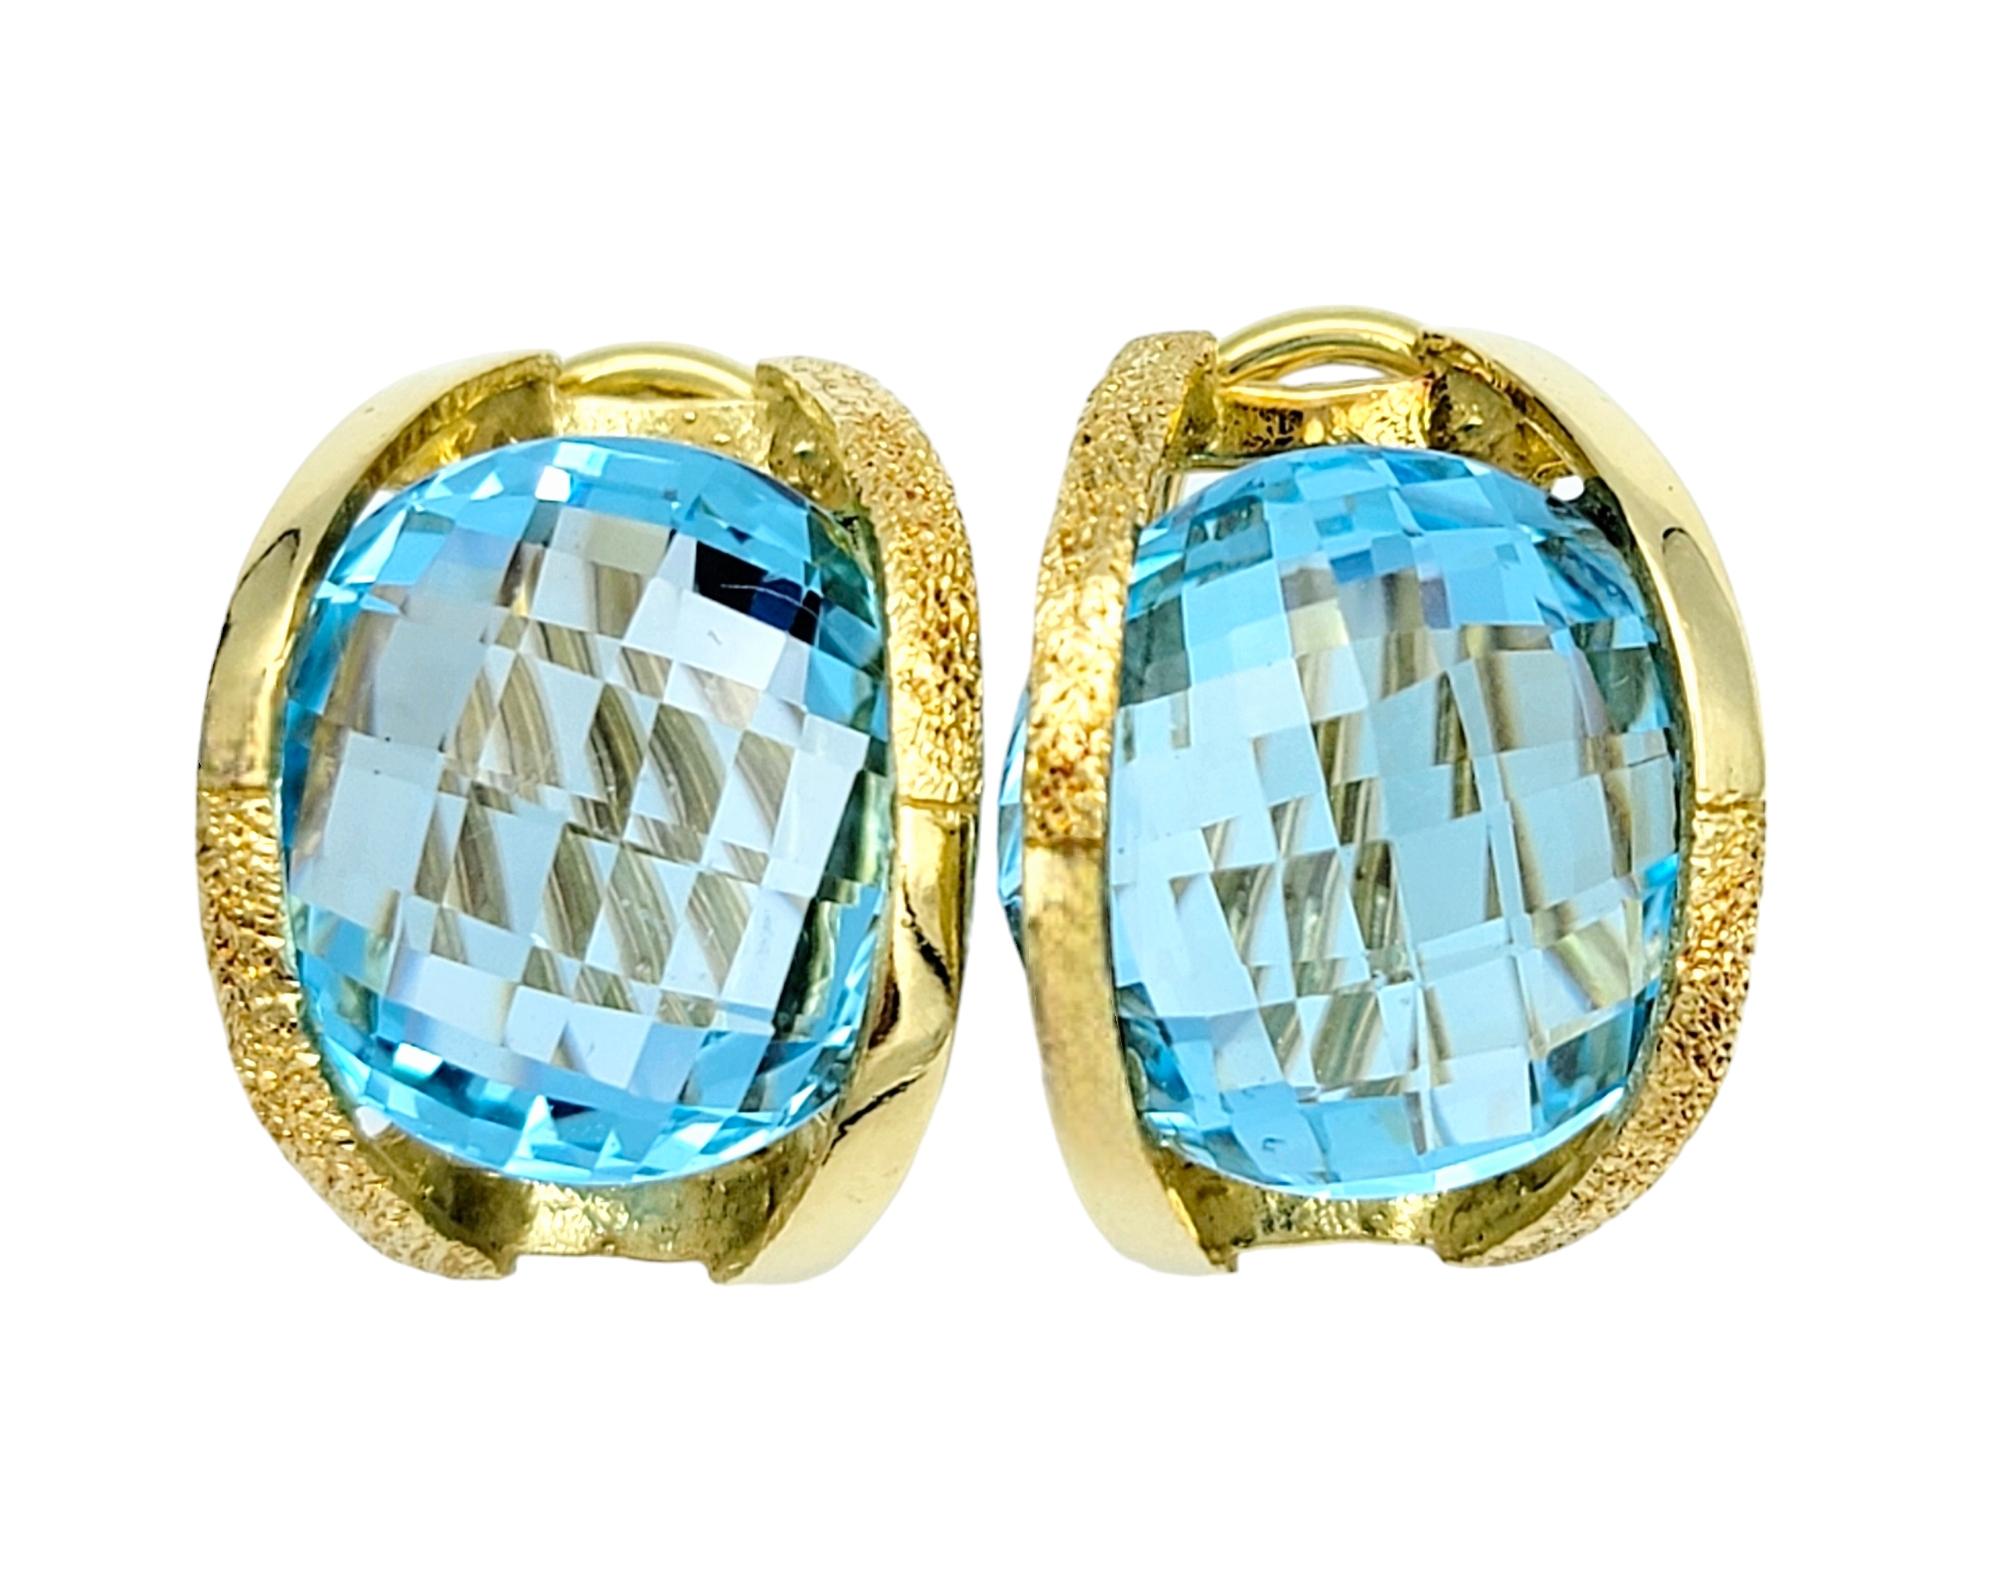 These round blue topaz earrings, set in lustrous 18 karat yellow gold, are an elegant piece of art. Each earring features a captivating blue topaz gemstone that glimmers with ethereal hues reminiscent of a tropical ocean. The gemstones are expertly